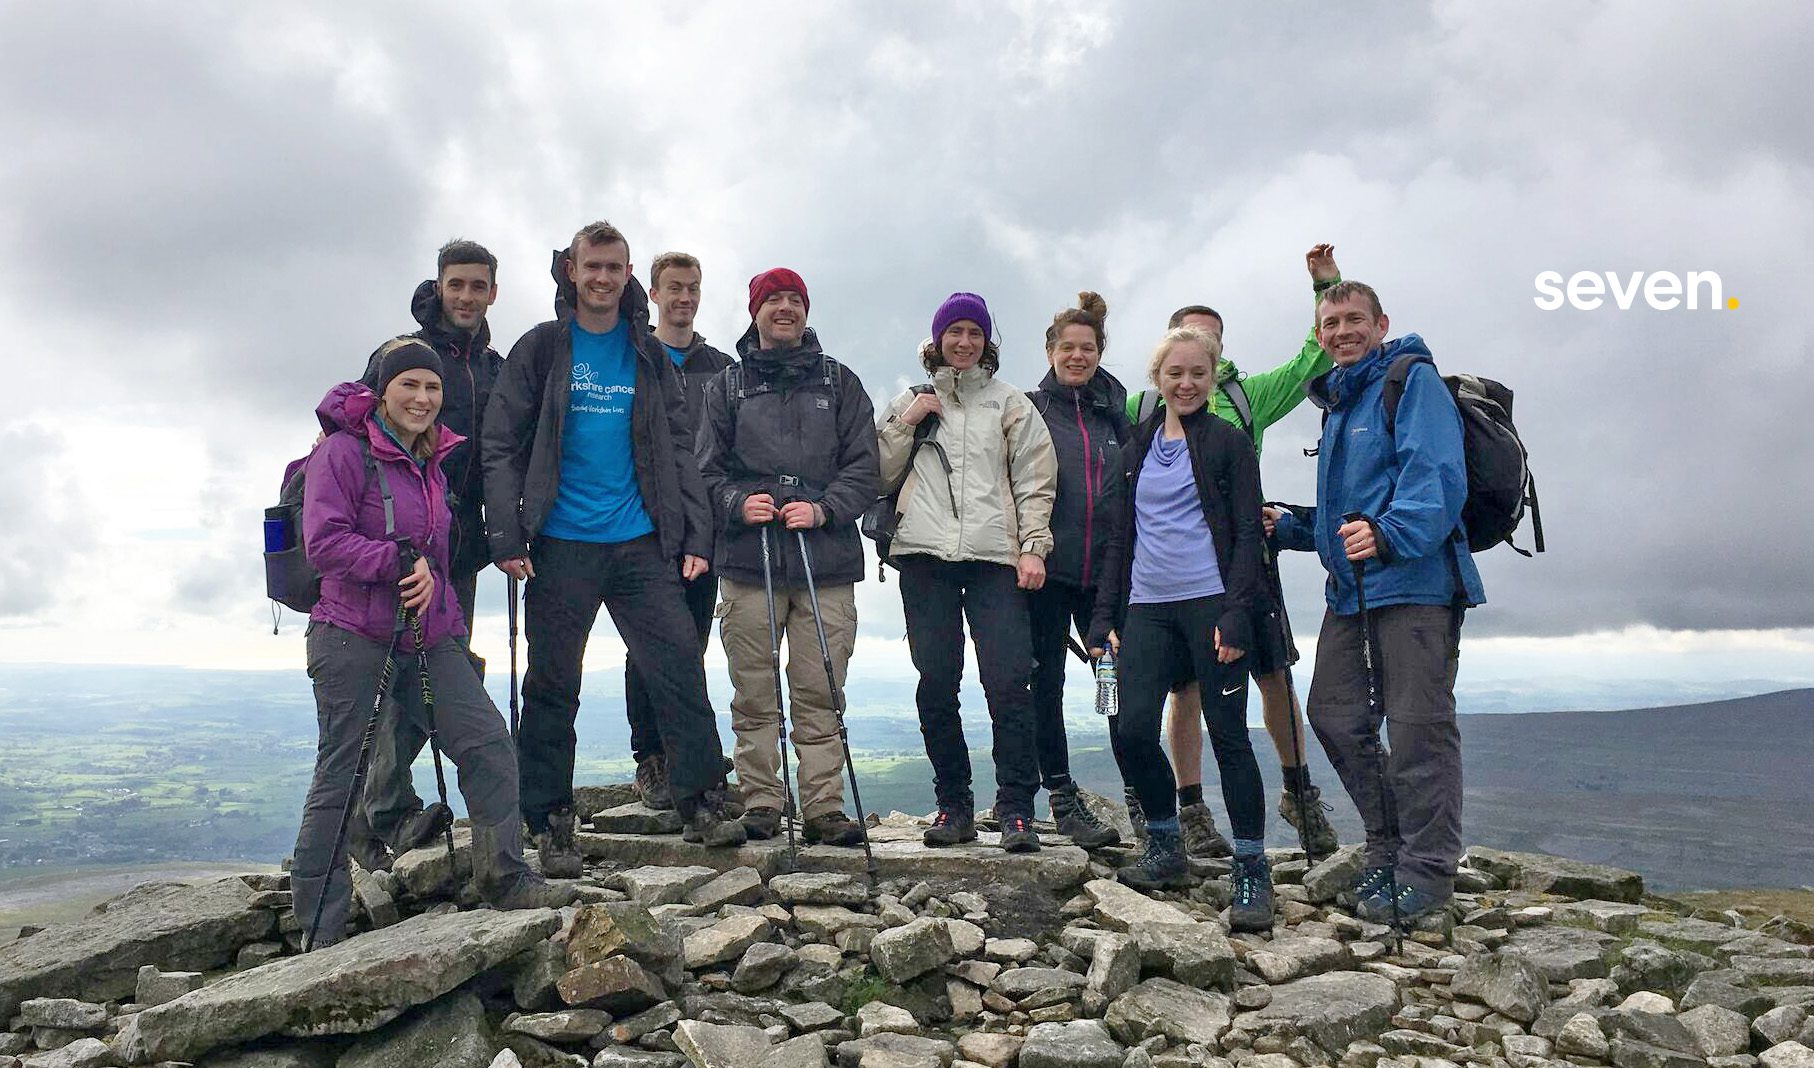 Seven taking on the three highest peaks in England, Scotland and Wales